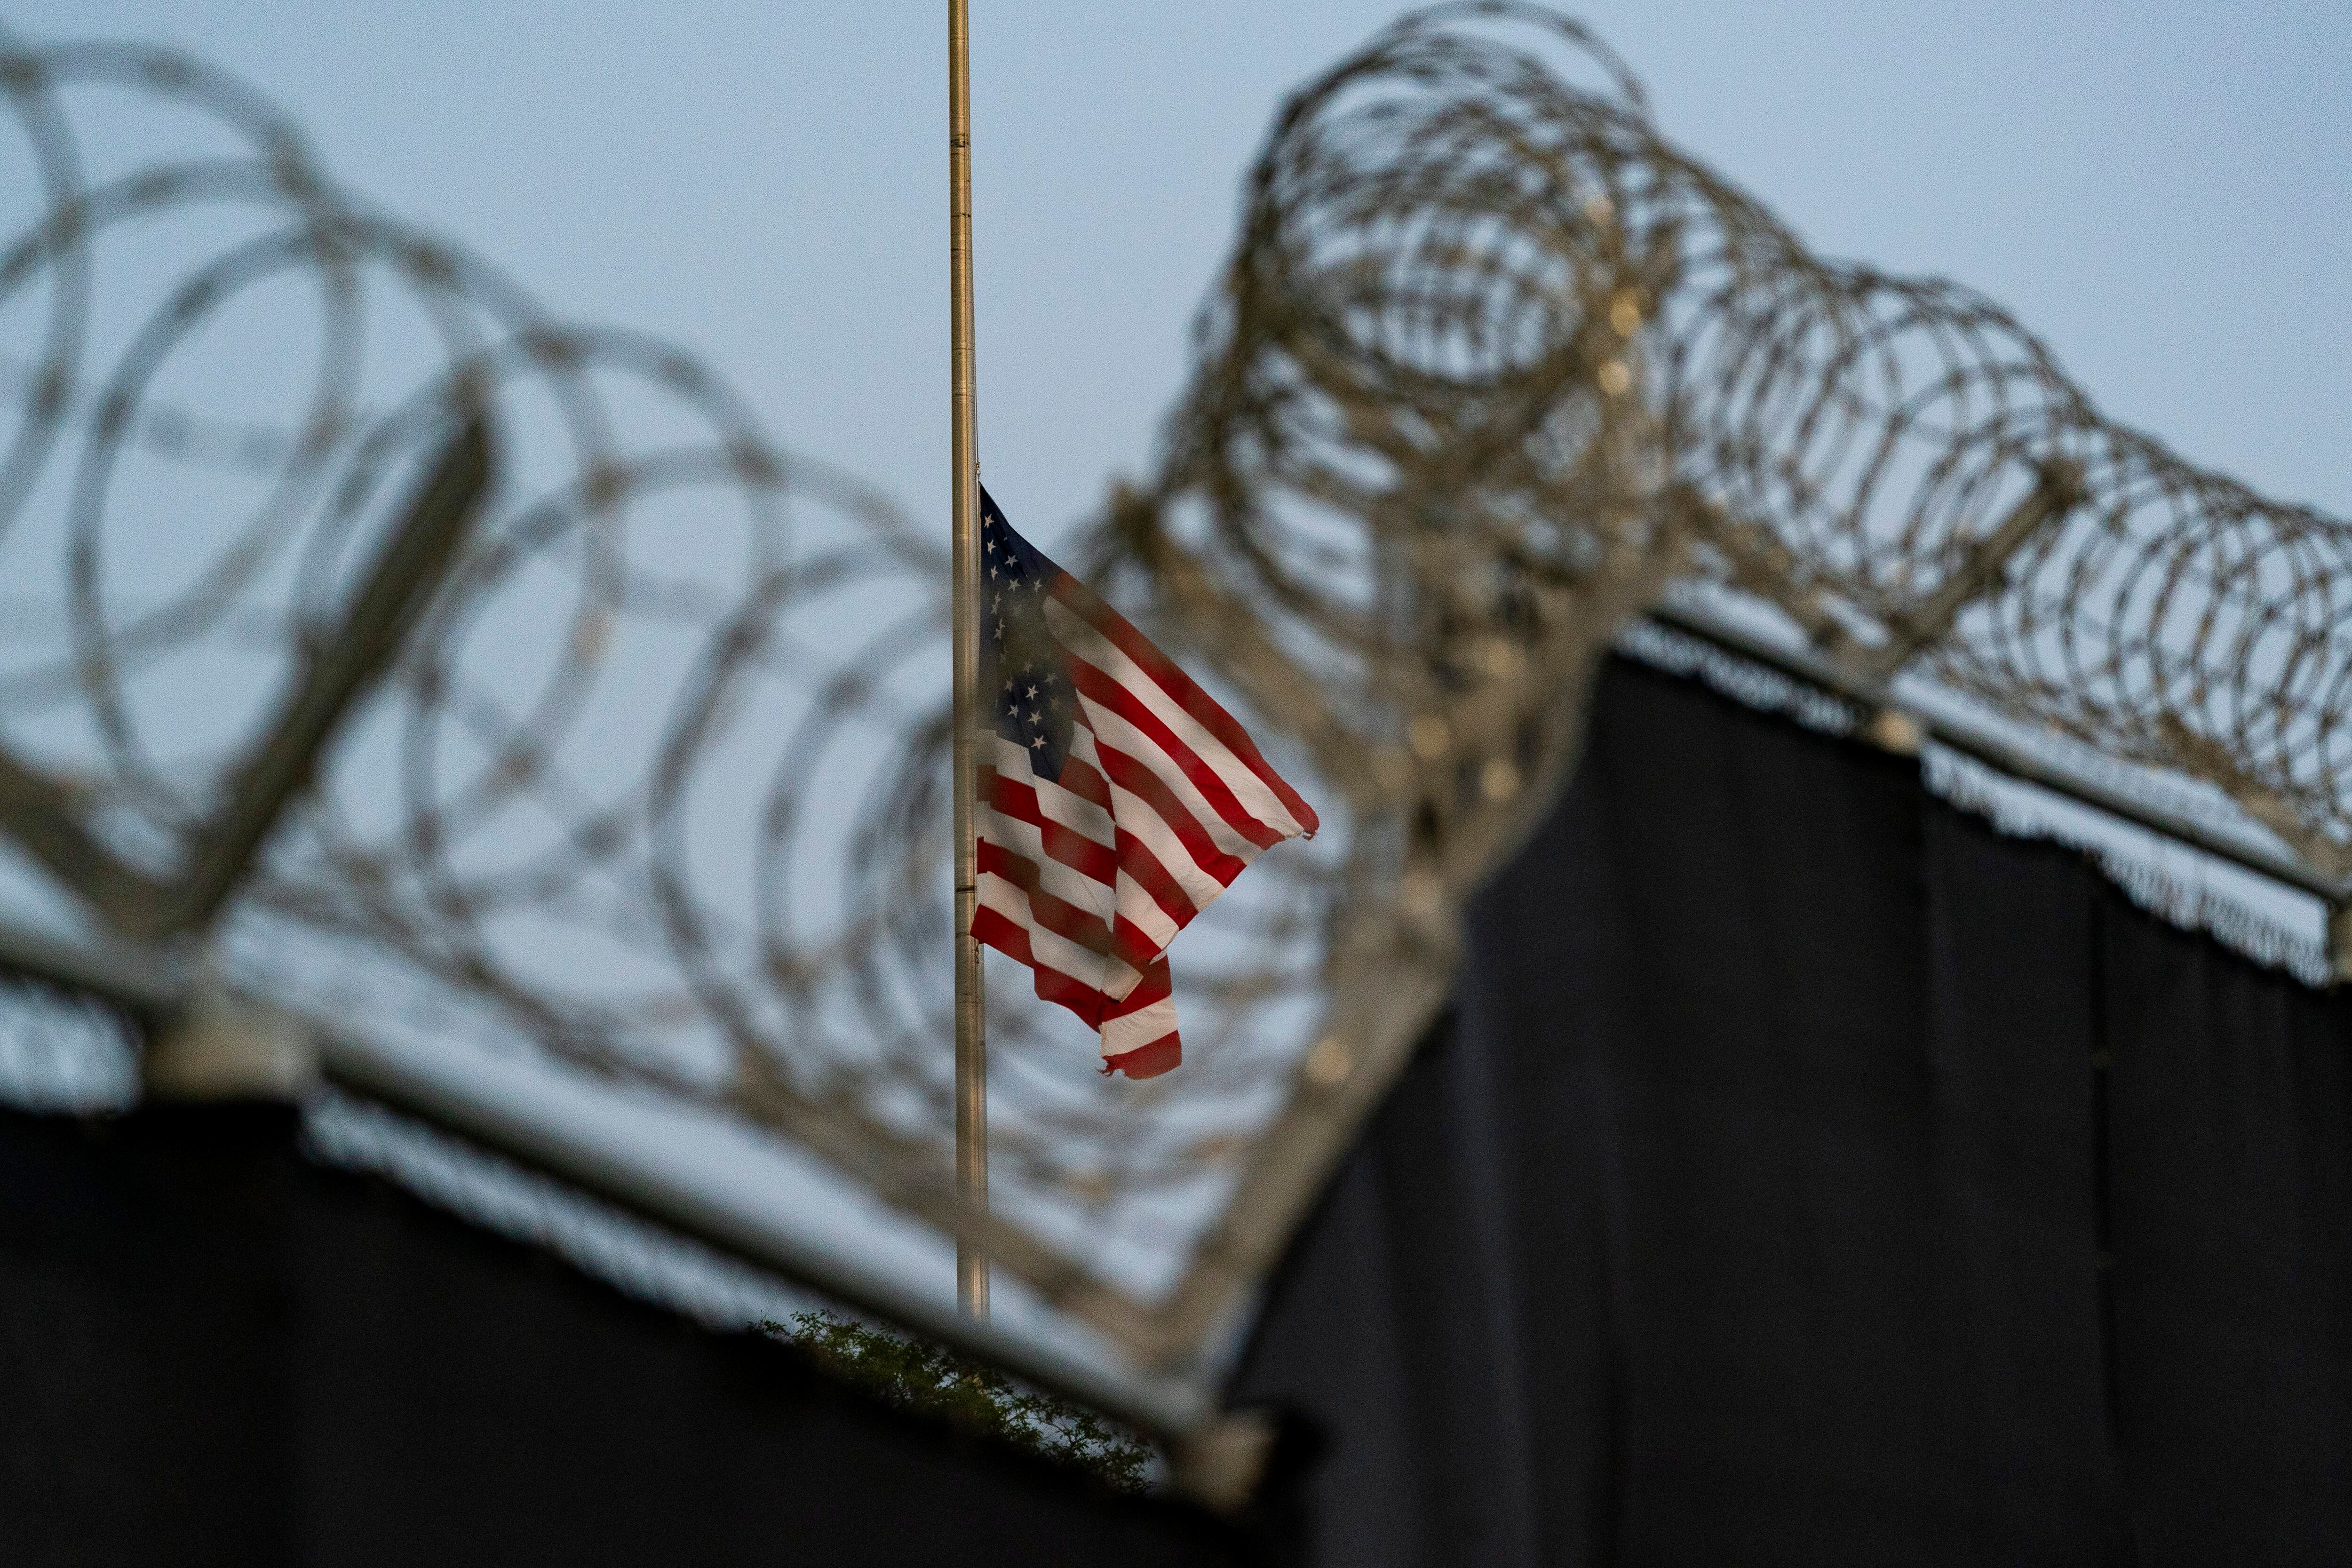 Guantanamo detainees tell first independent visitor about scars from torture and hopes to leave